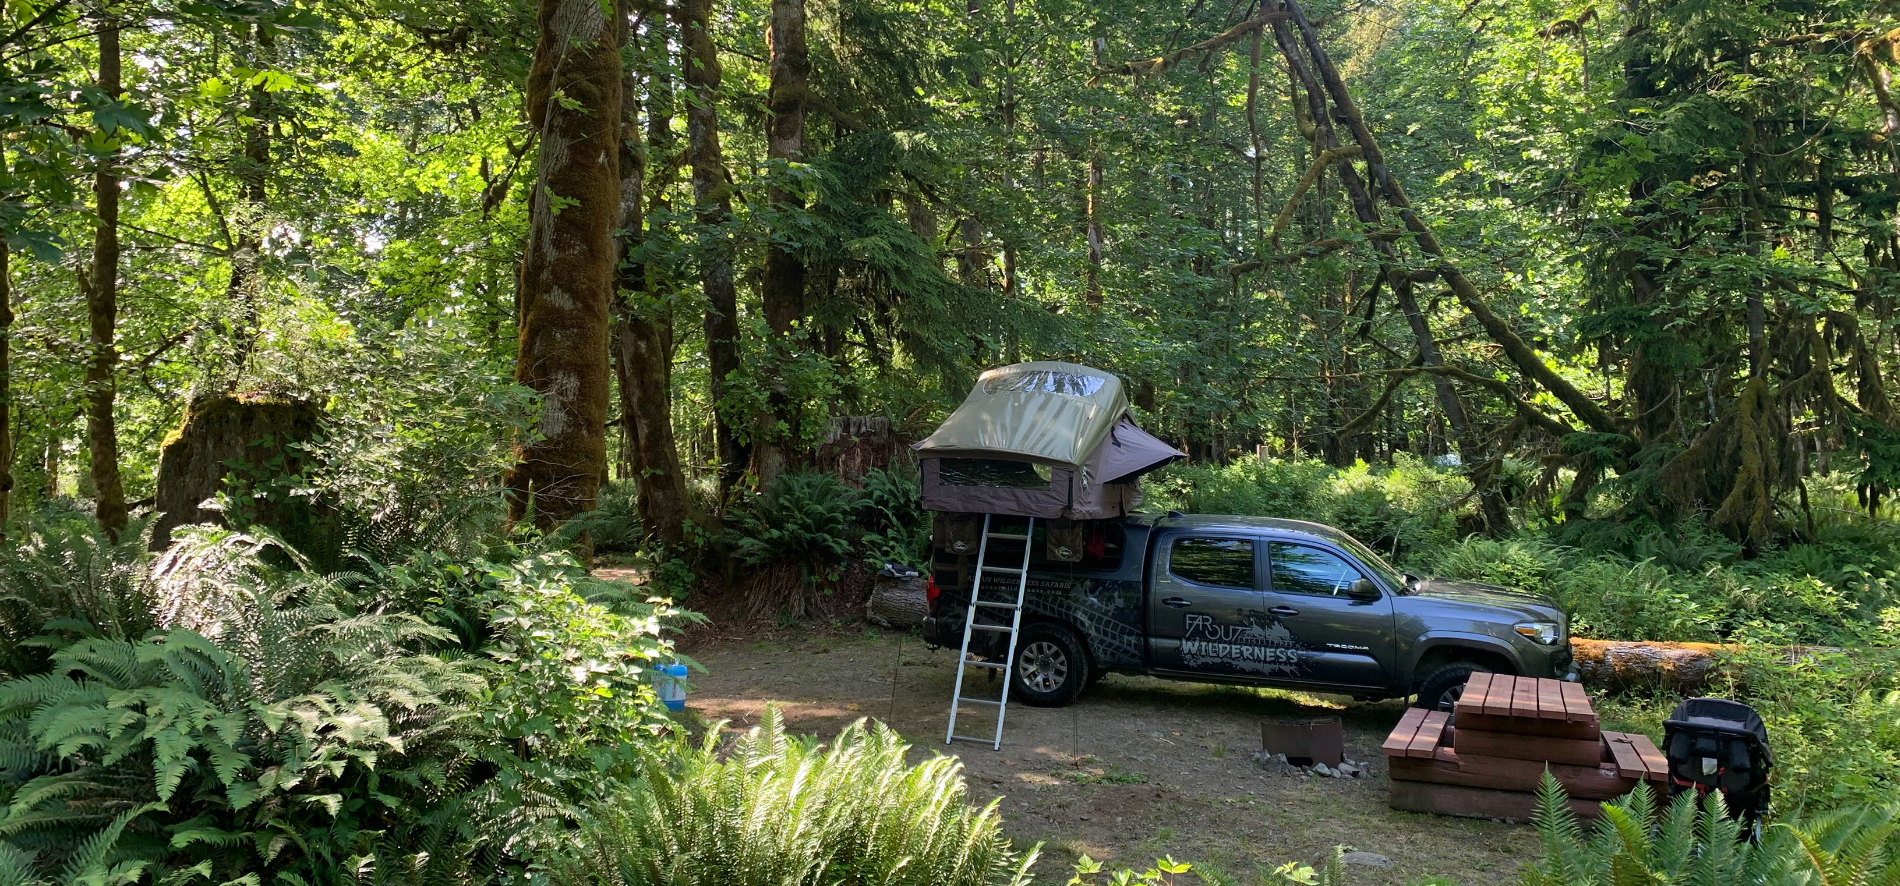 Camping without a reservation on Vancouver Island